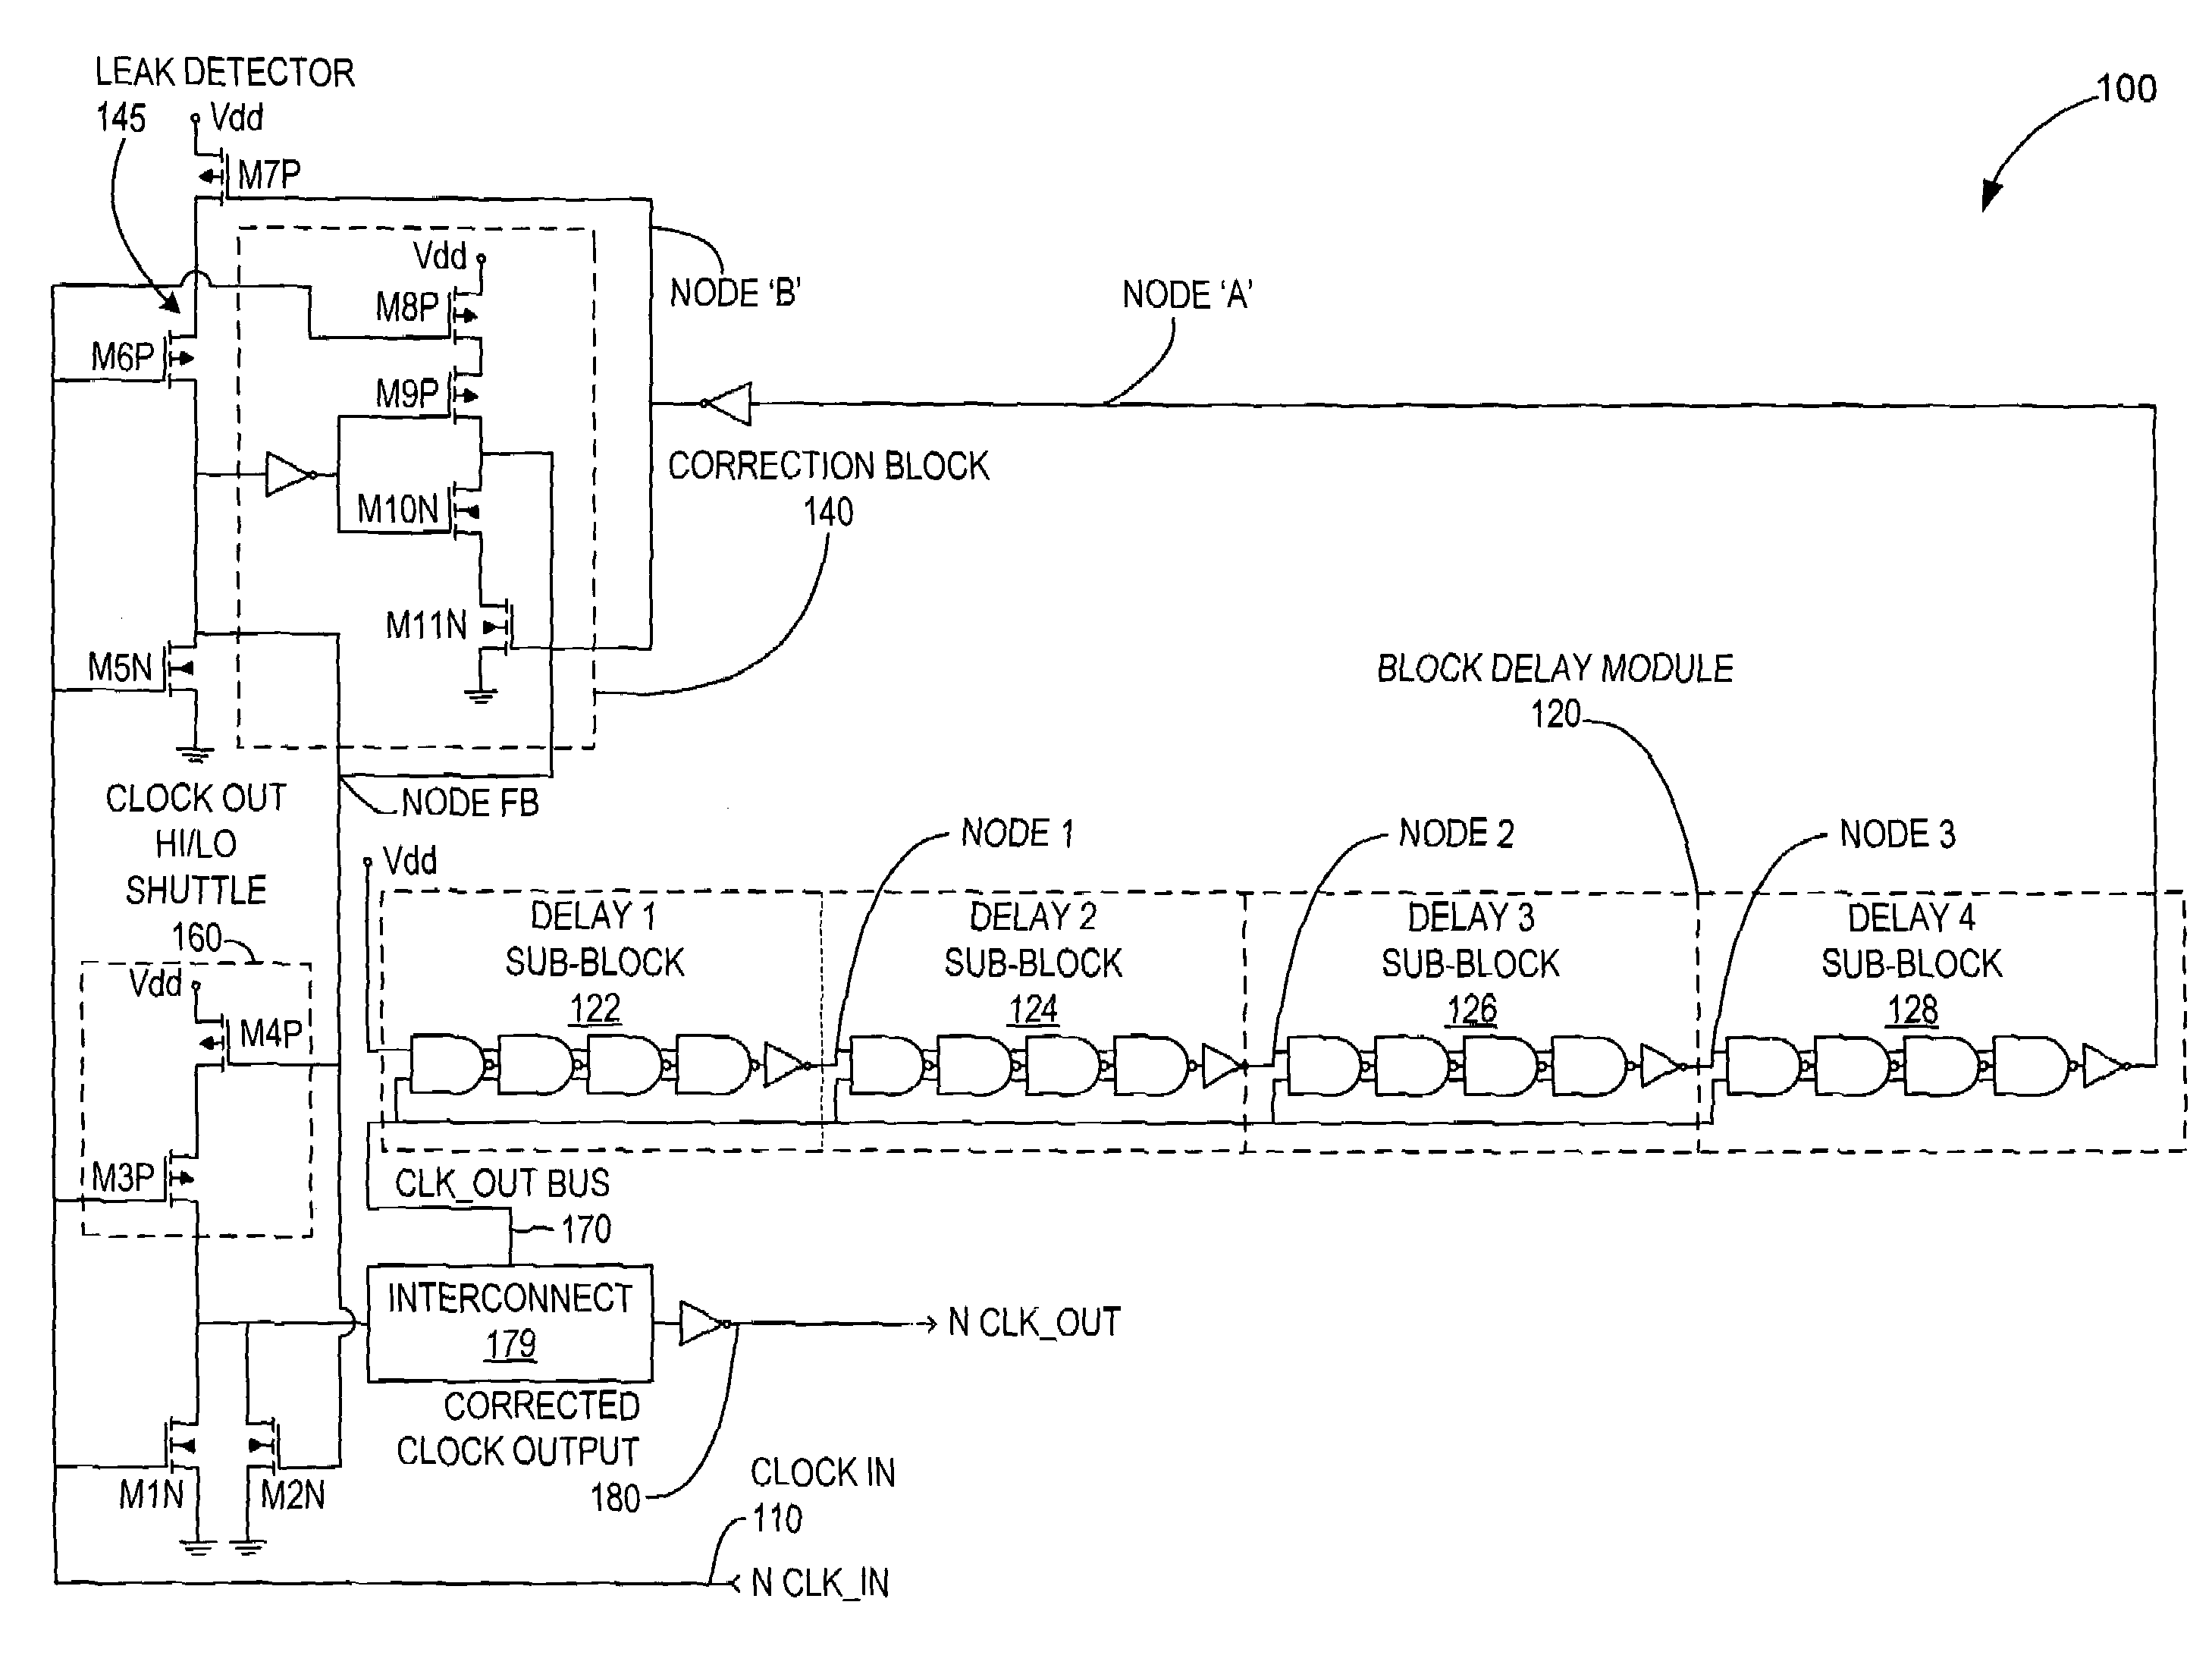 Simplified method for limiting clock pulse width